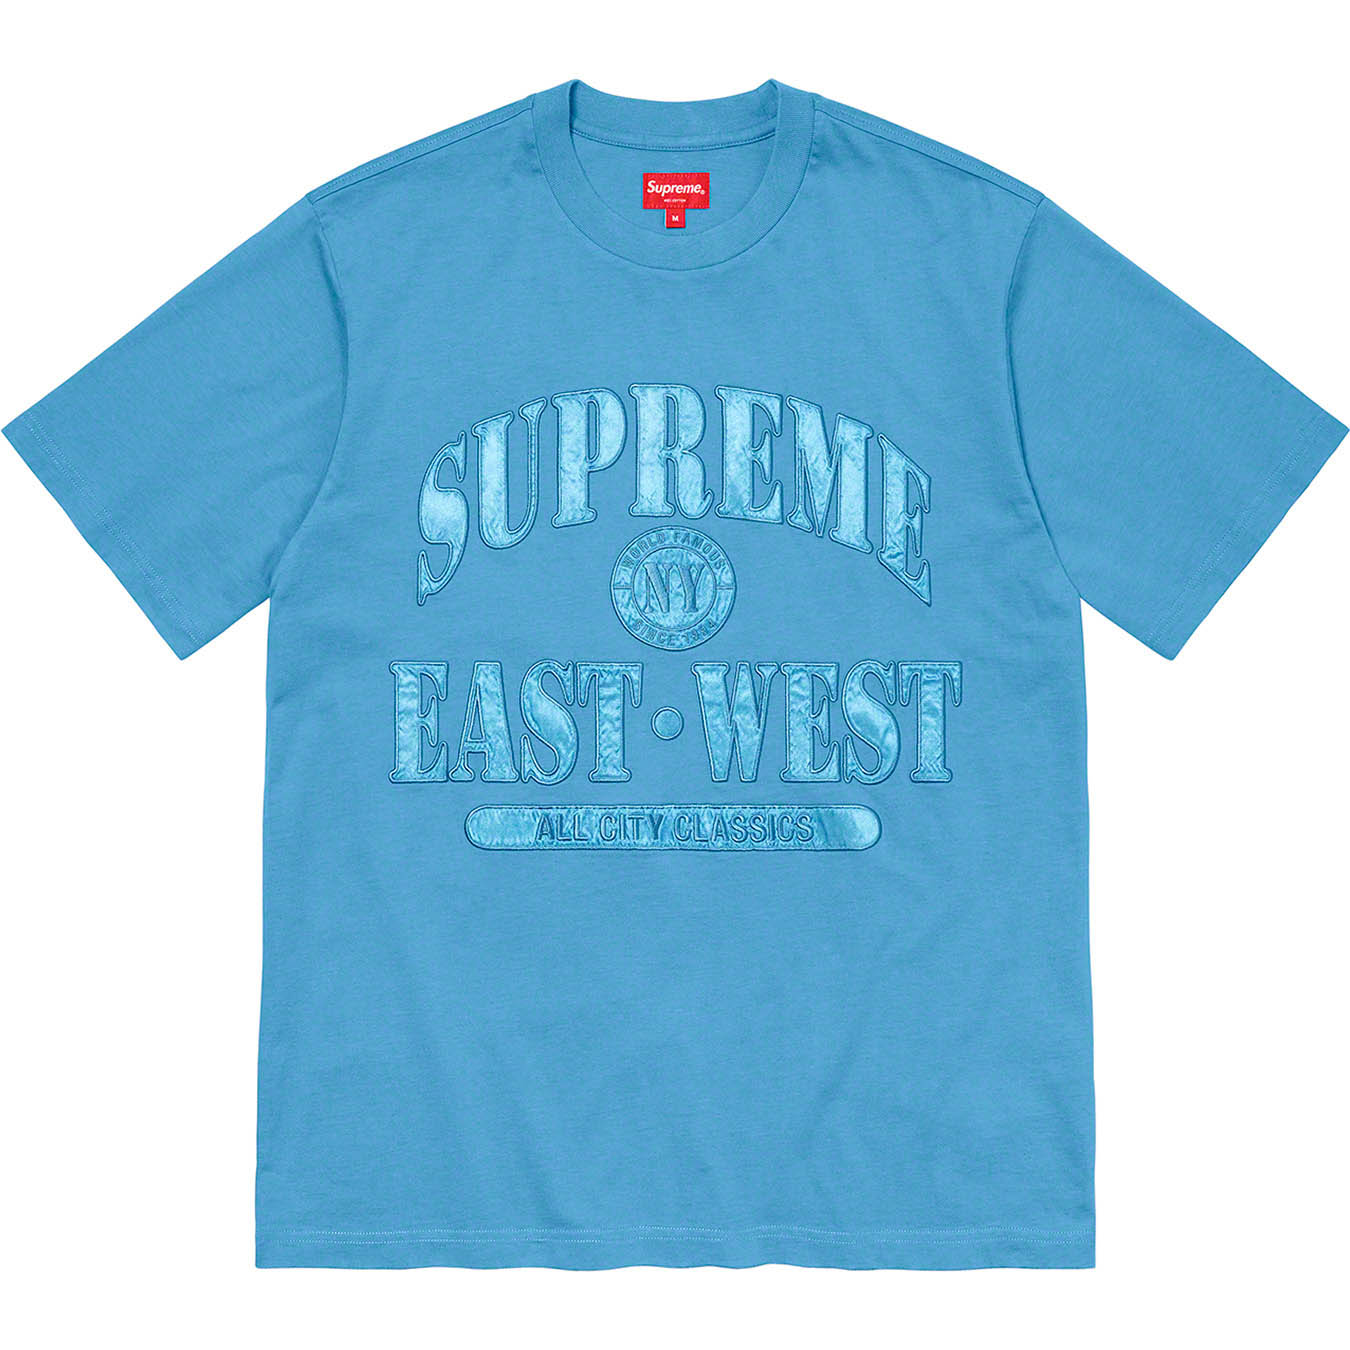 East West S/S Top | Supreme 21fw